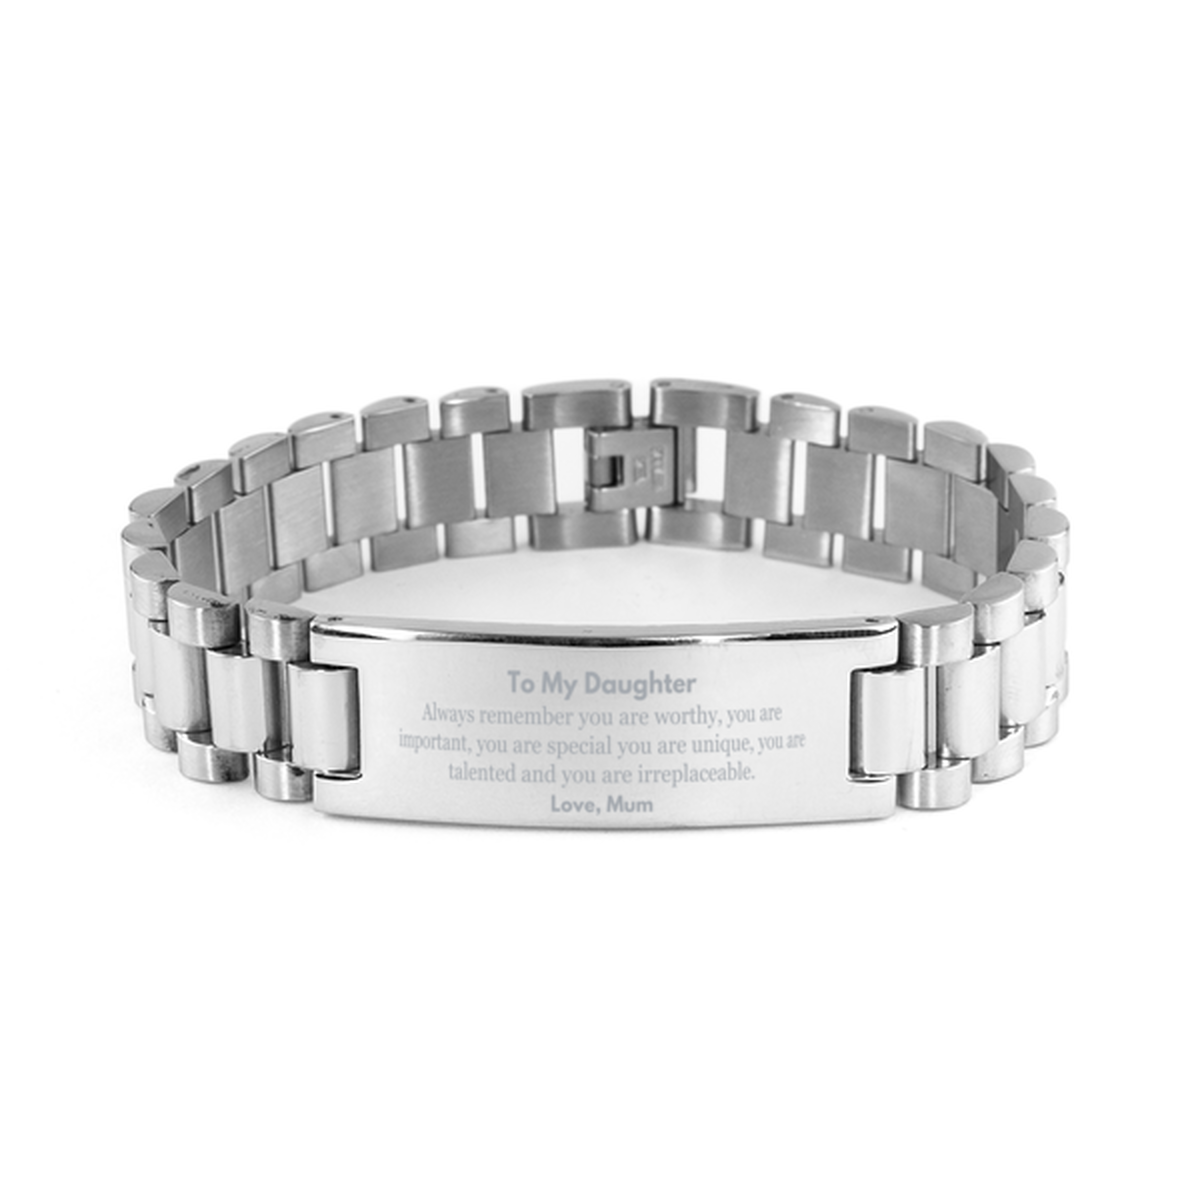 Daughter Birthday Gifts from Mum, Inspirational Ladder Stainless Steel Bracelet for Daughter Christmas Graduation Gifts for Daughter Always remember you are worthy, you are important. Love, Mum